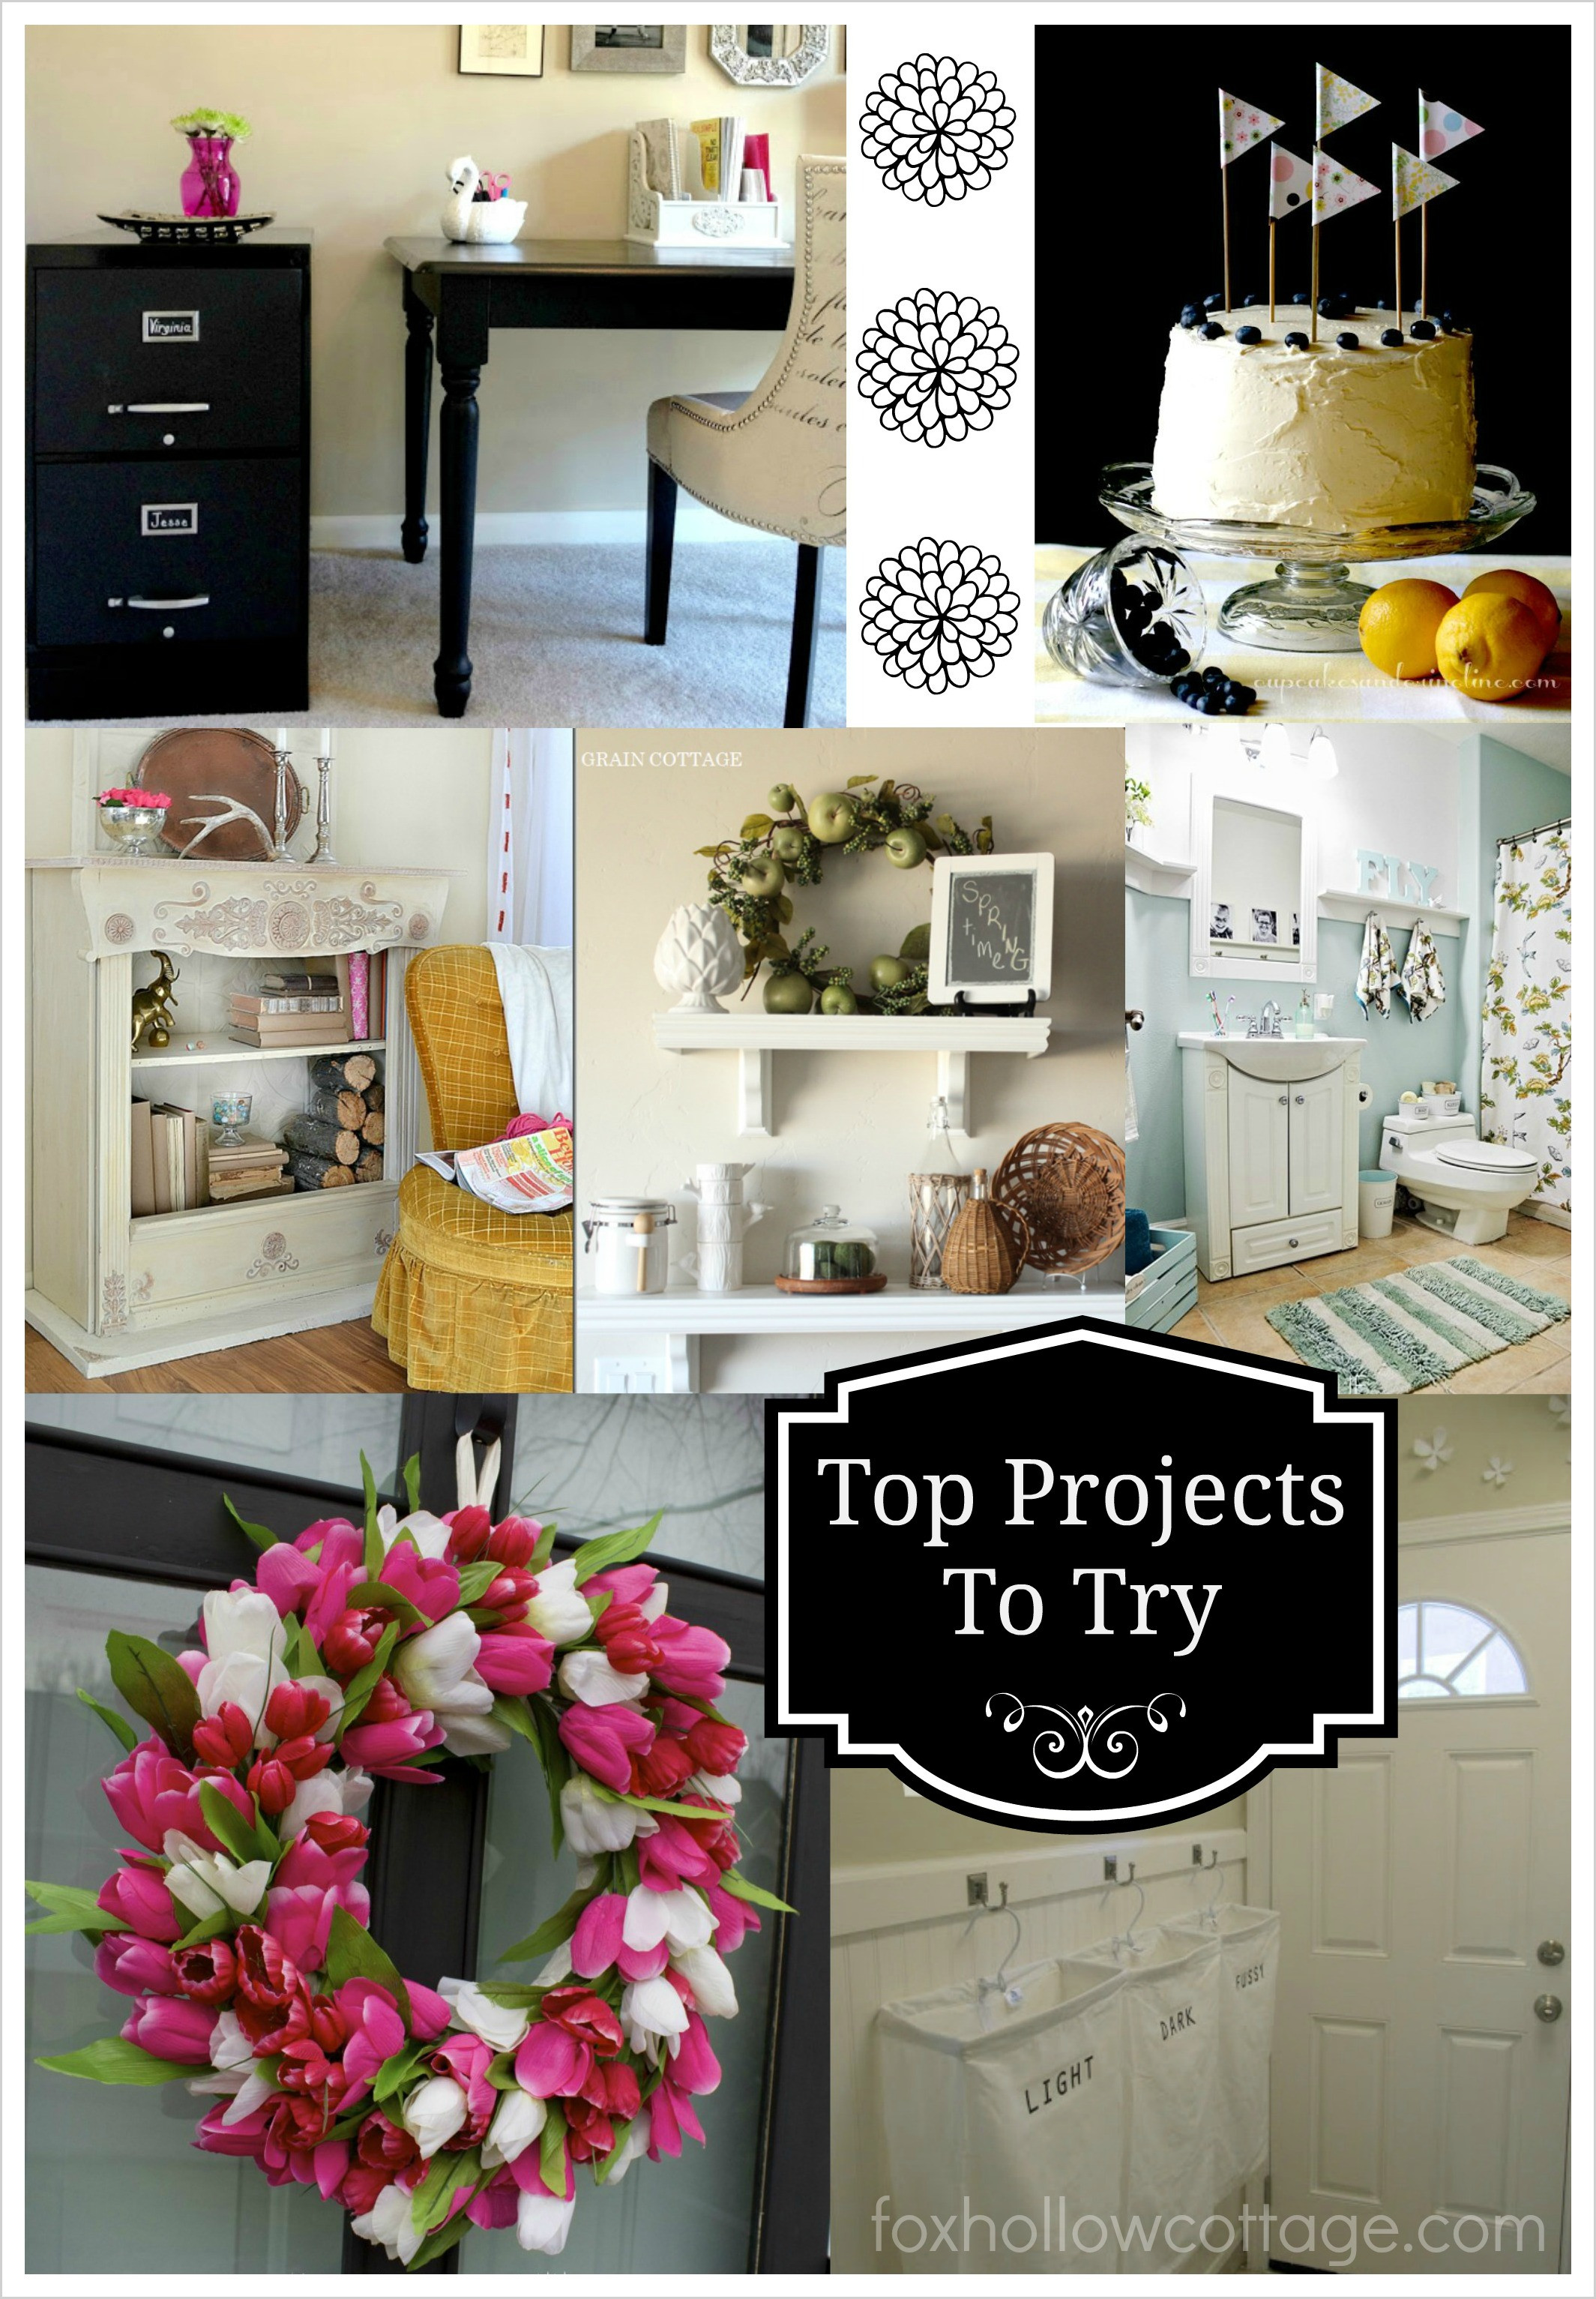 DIY Home Decor Pinterest
 Power Pinterest Link Party and Friday Fav Features 